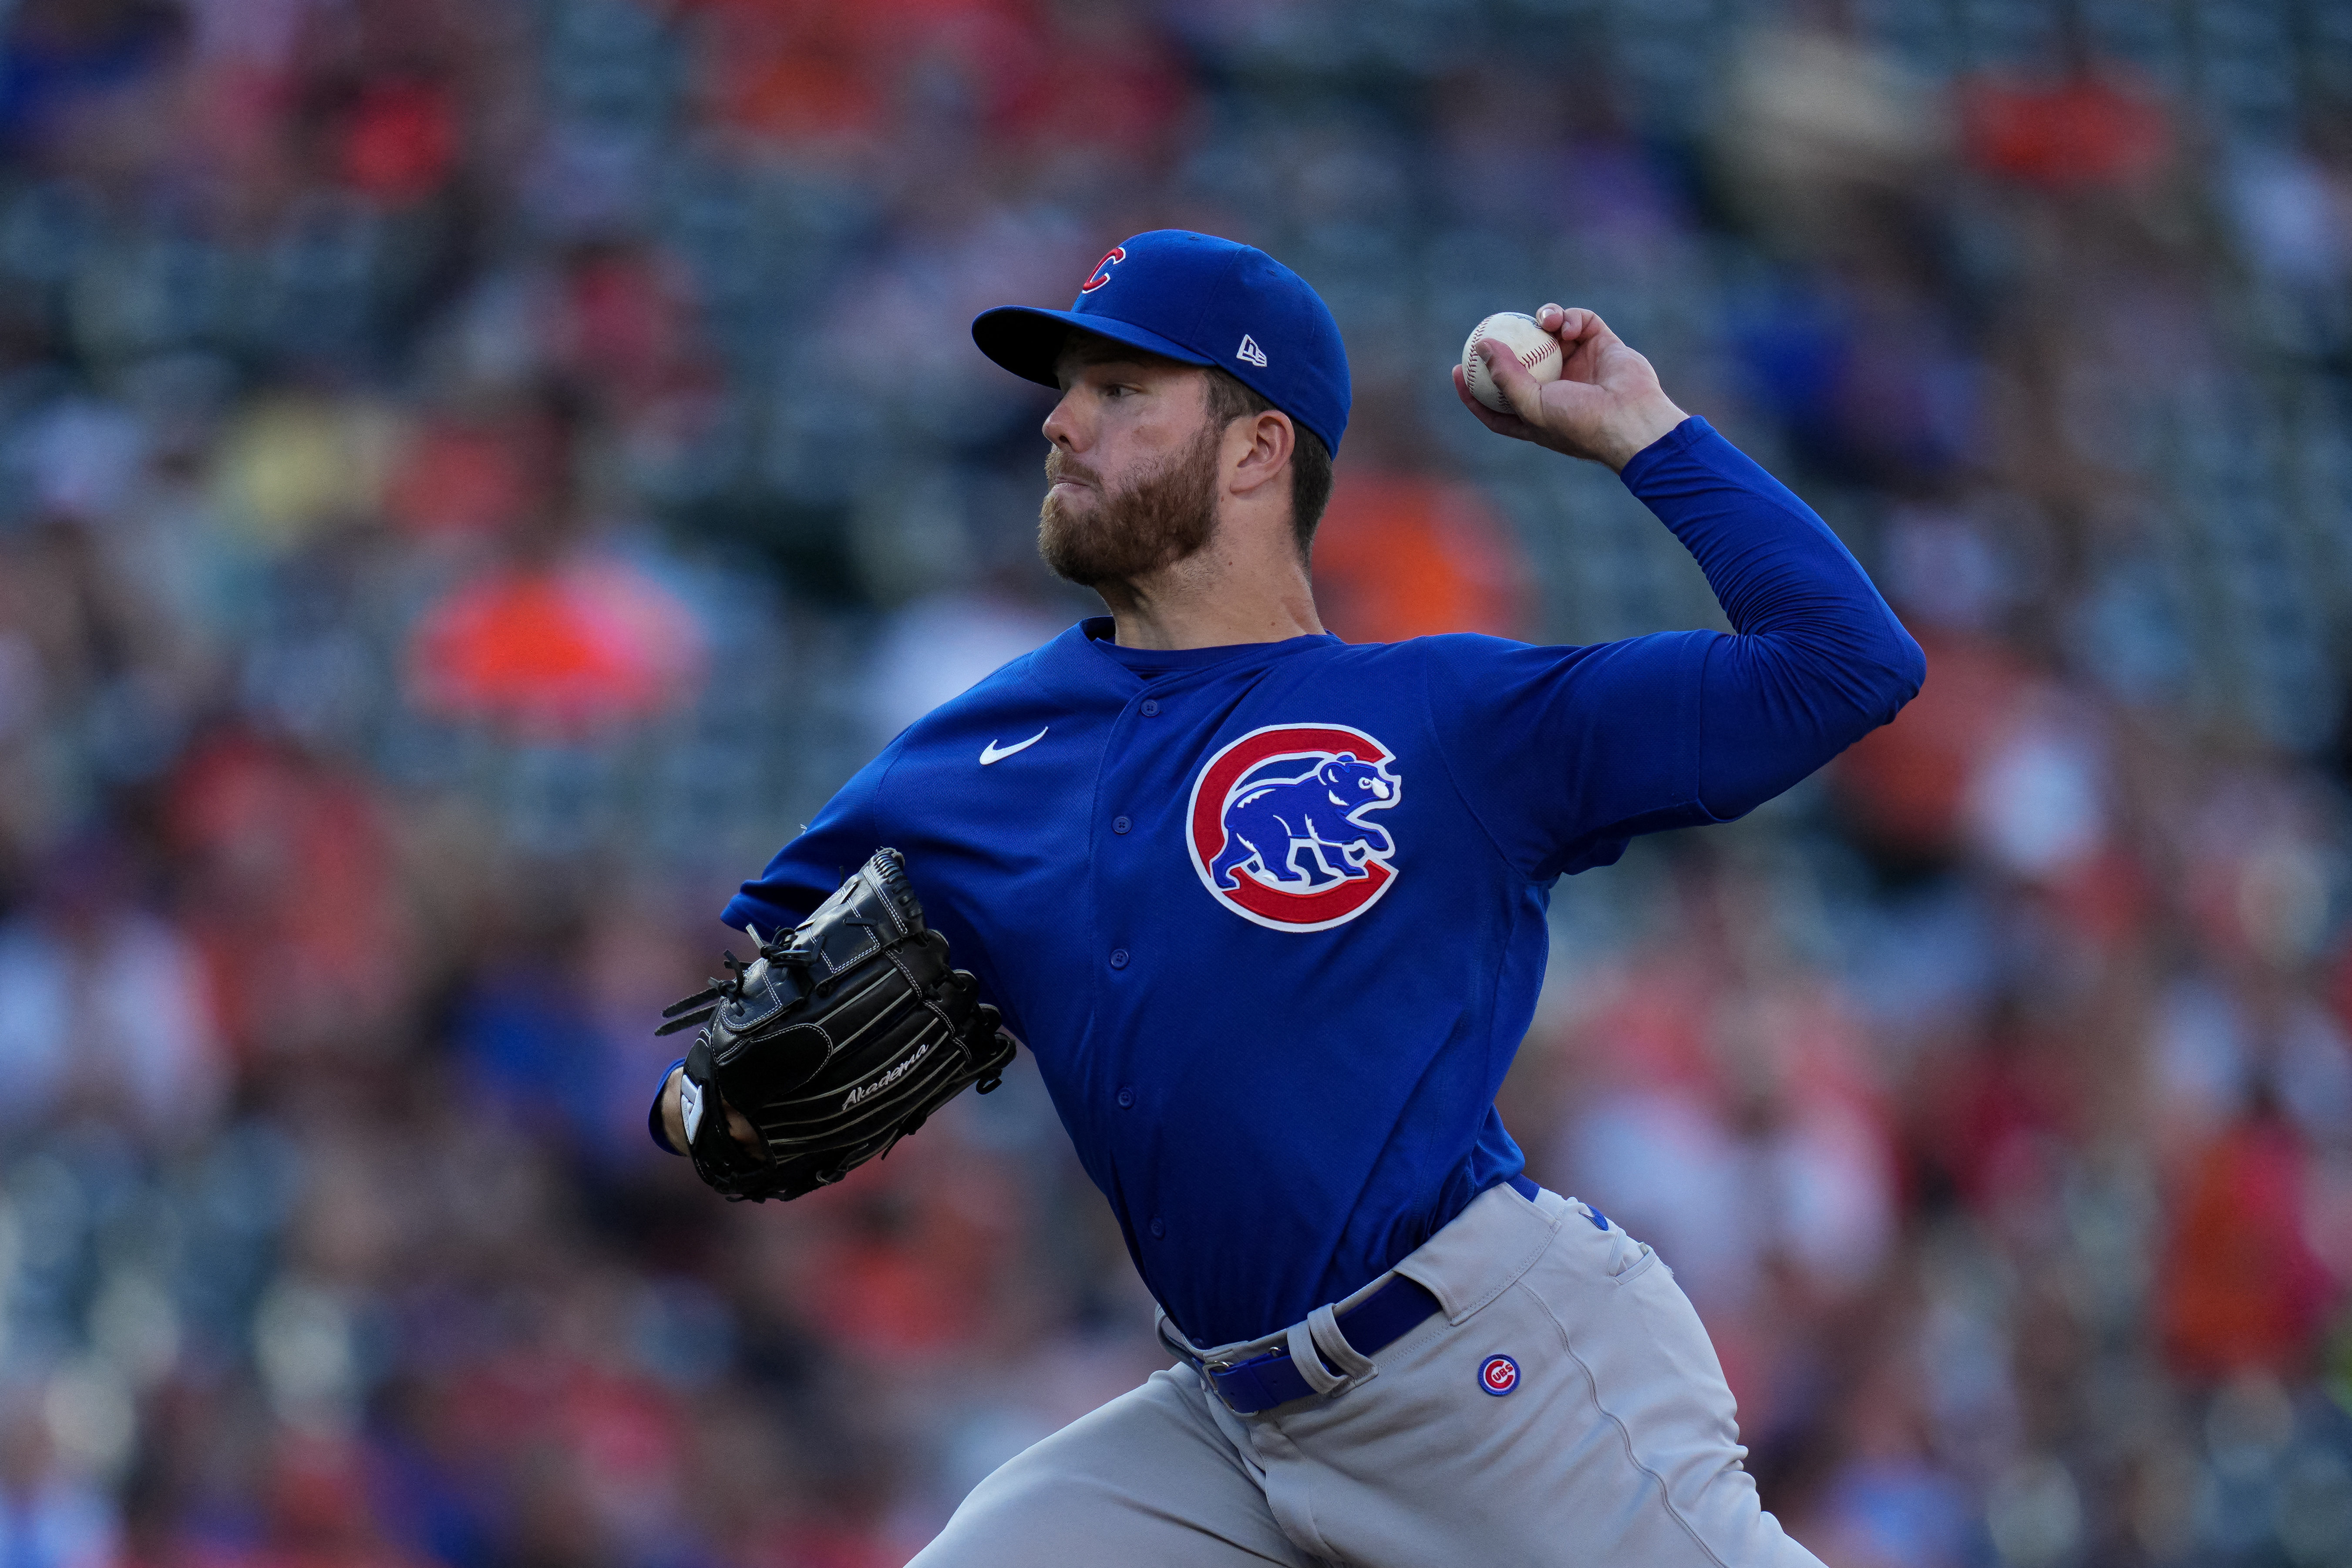 MLB: Chicago Cubs at Baltimore Orioles